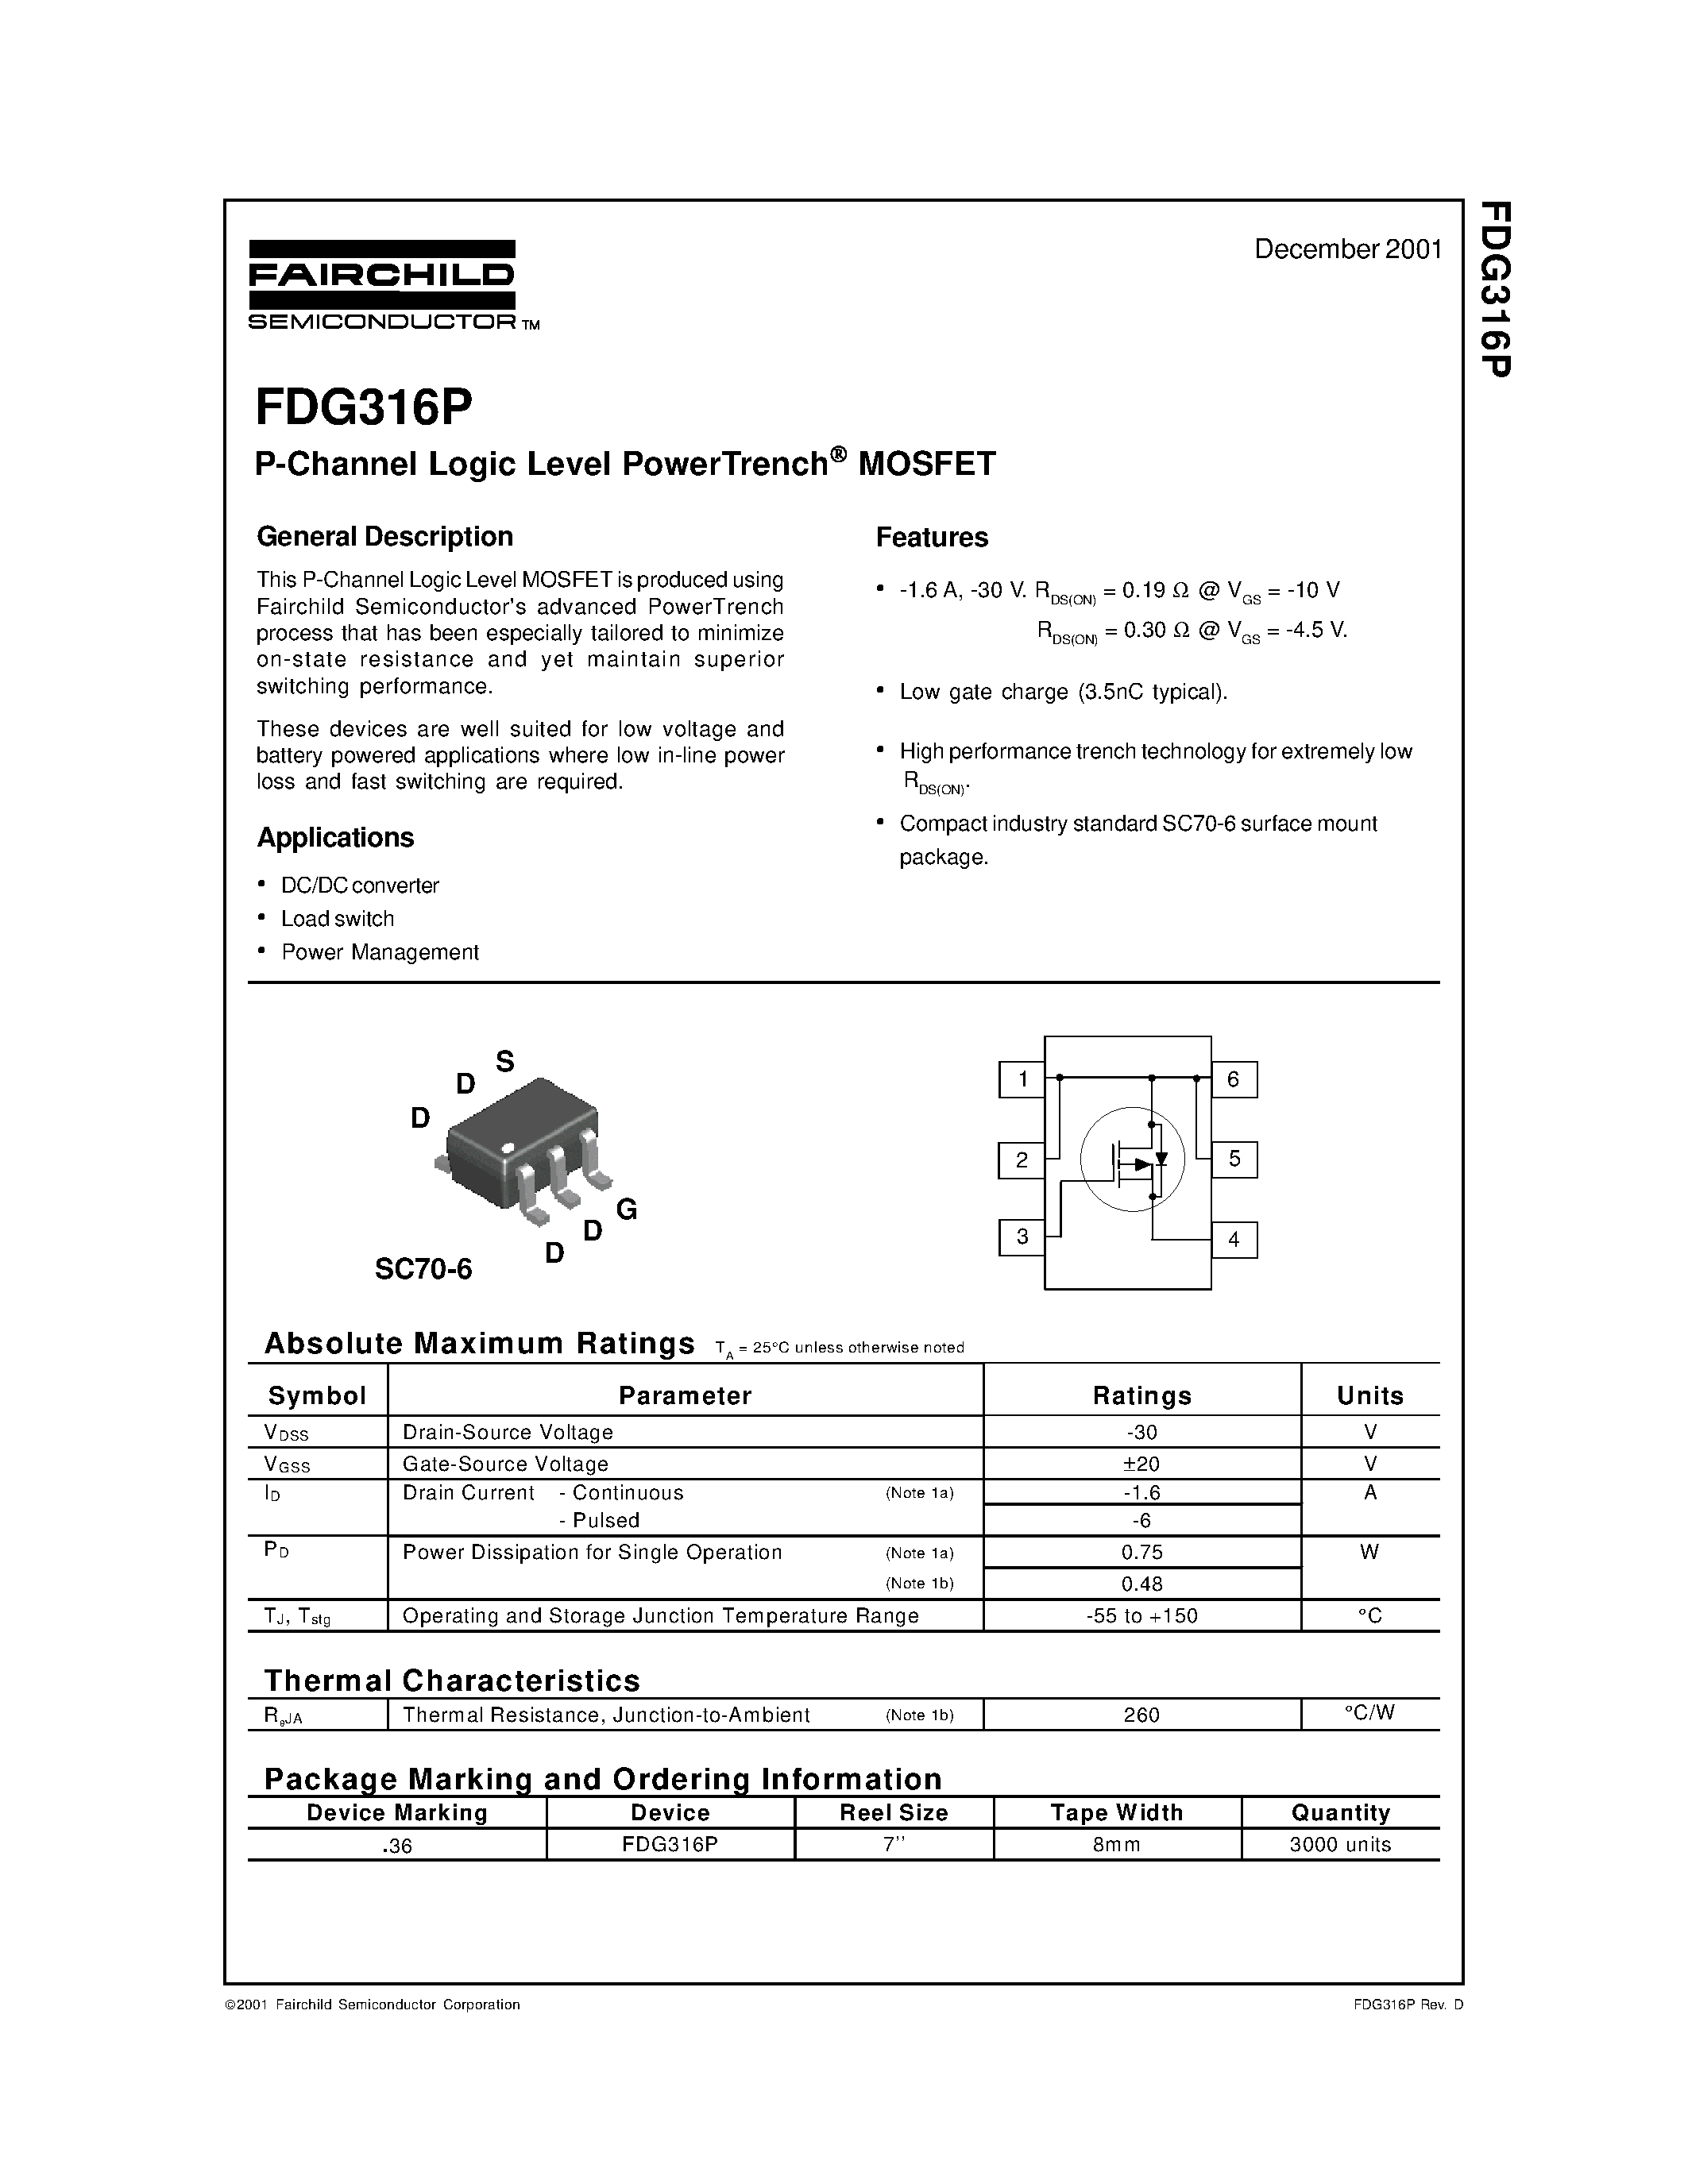 Datasheet FDG316P - P-Channel Logic Level PowerTrench MOSFET page 1